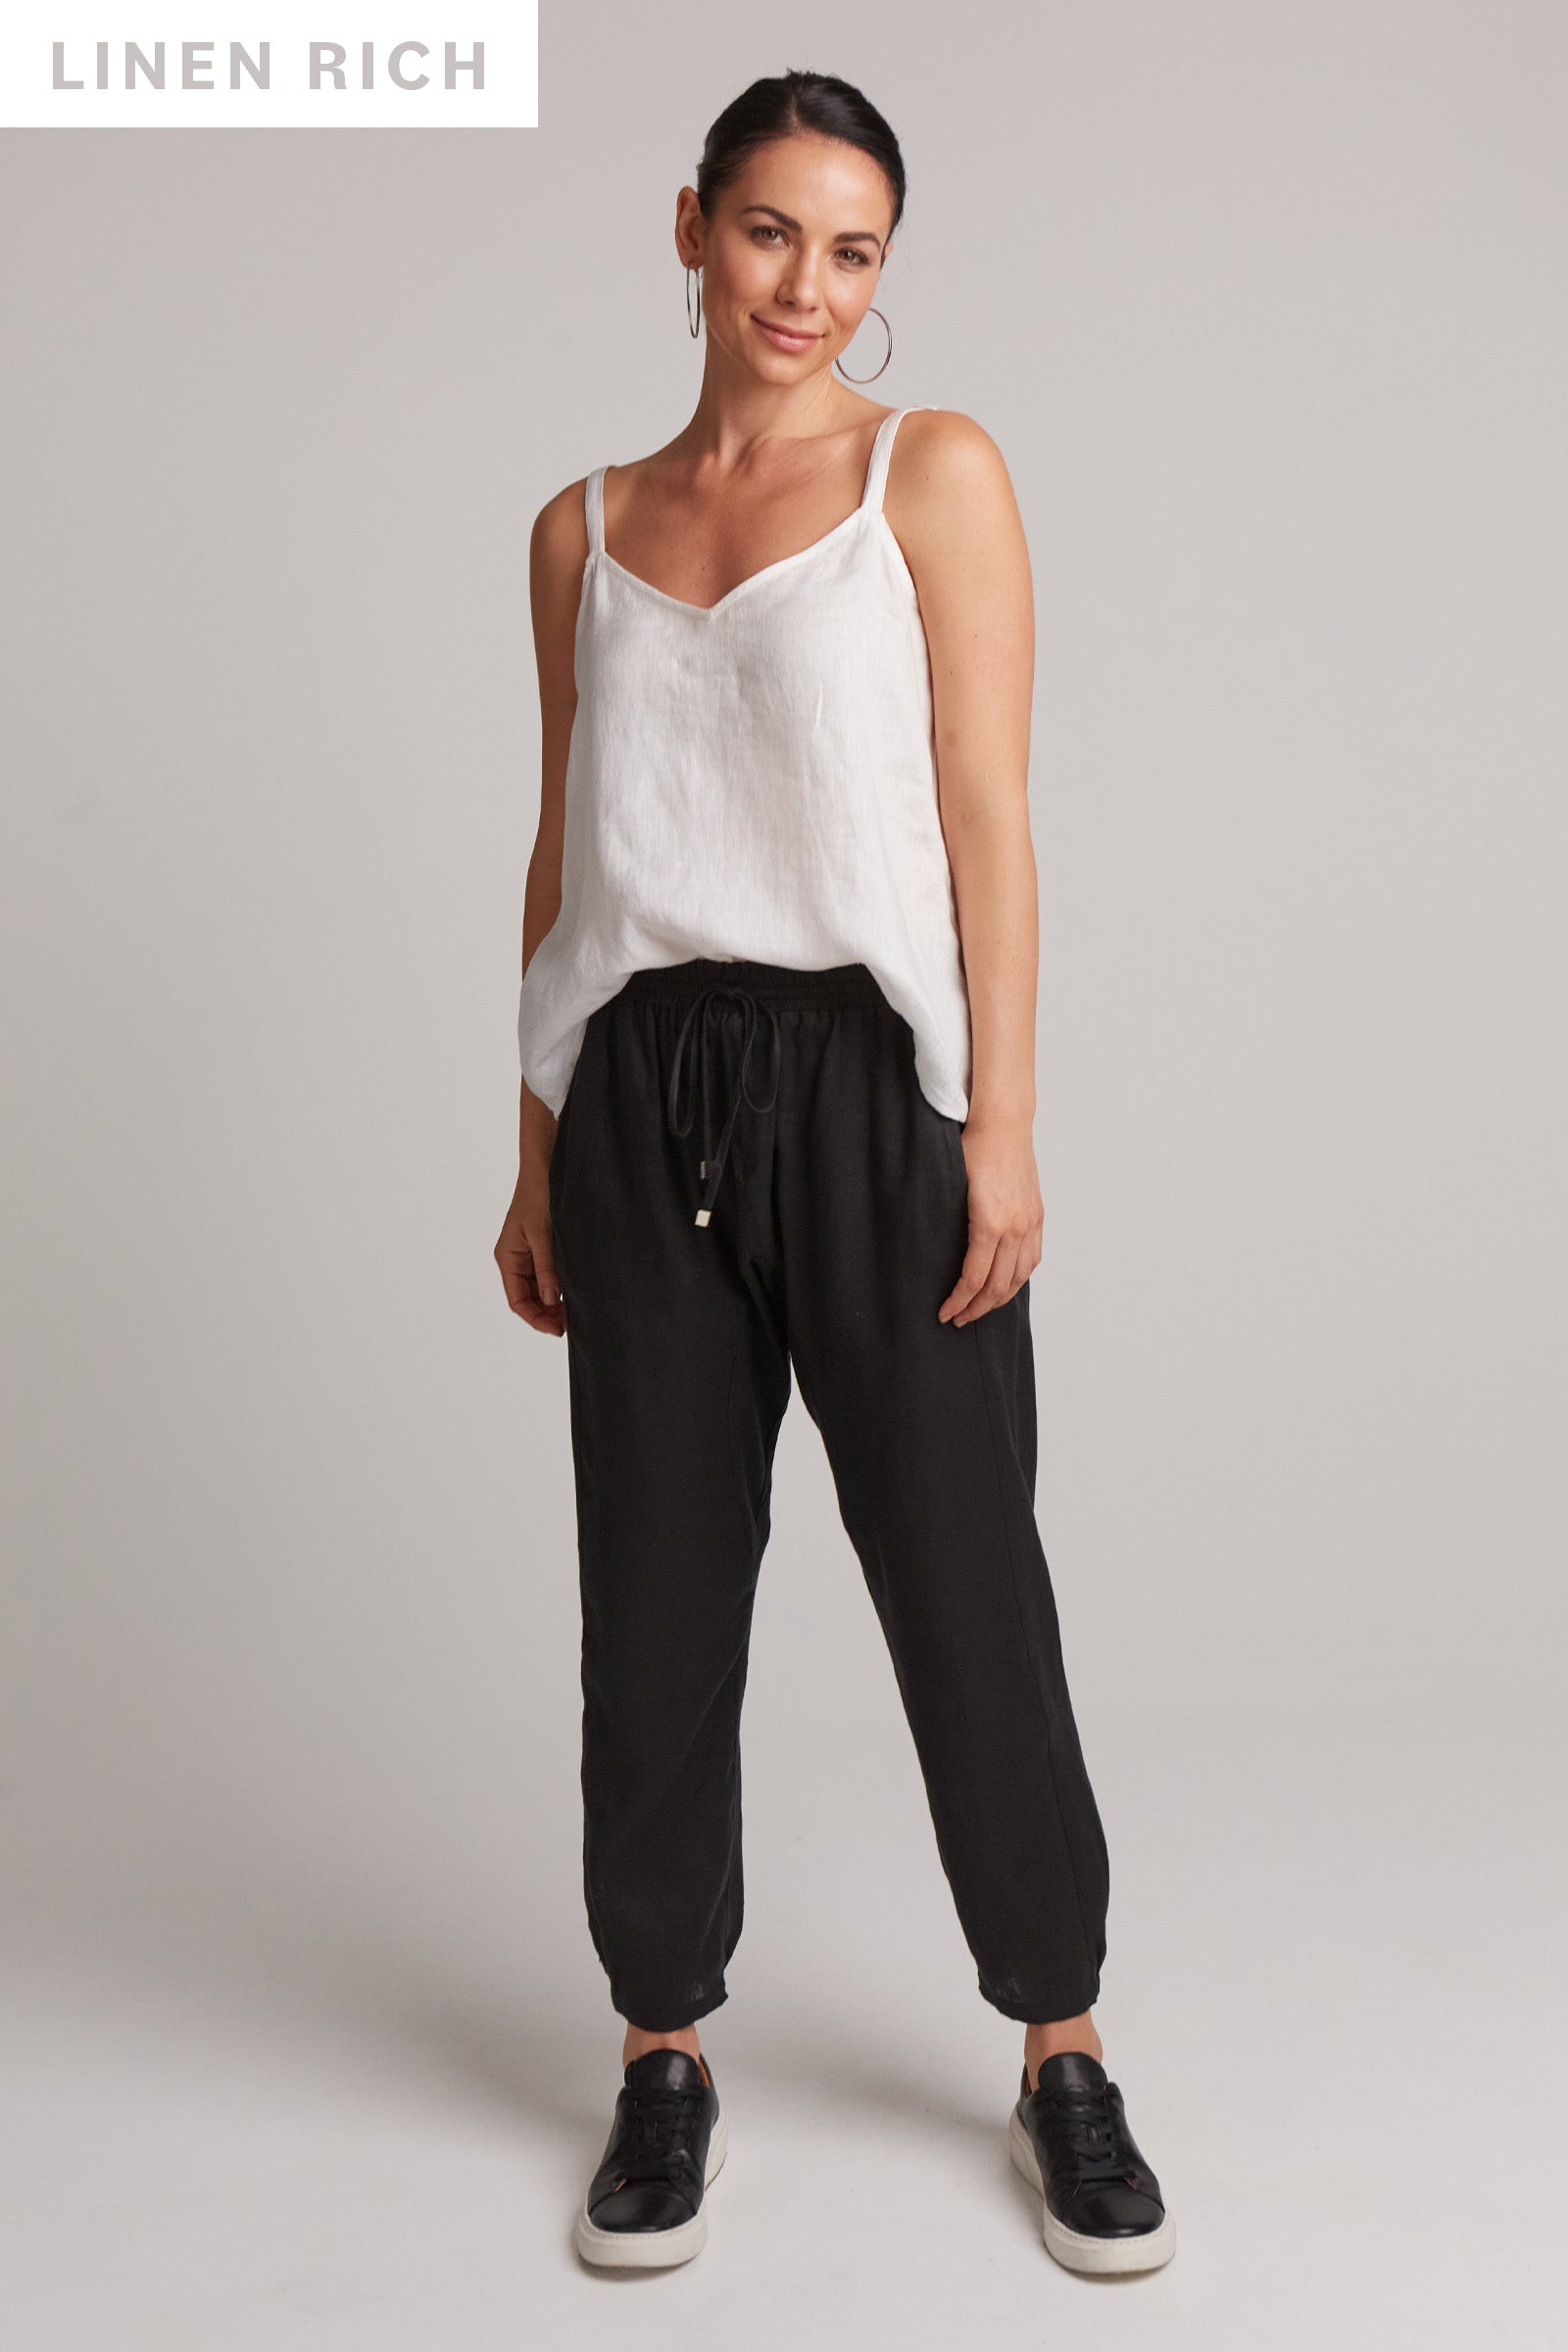 Studio Relaxed Pant - Ebony - eb&ive Clothing - Pant Relaxed Linen